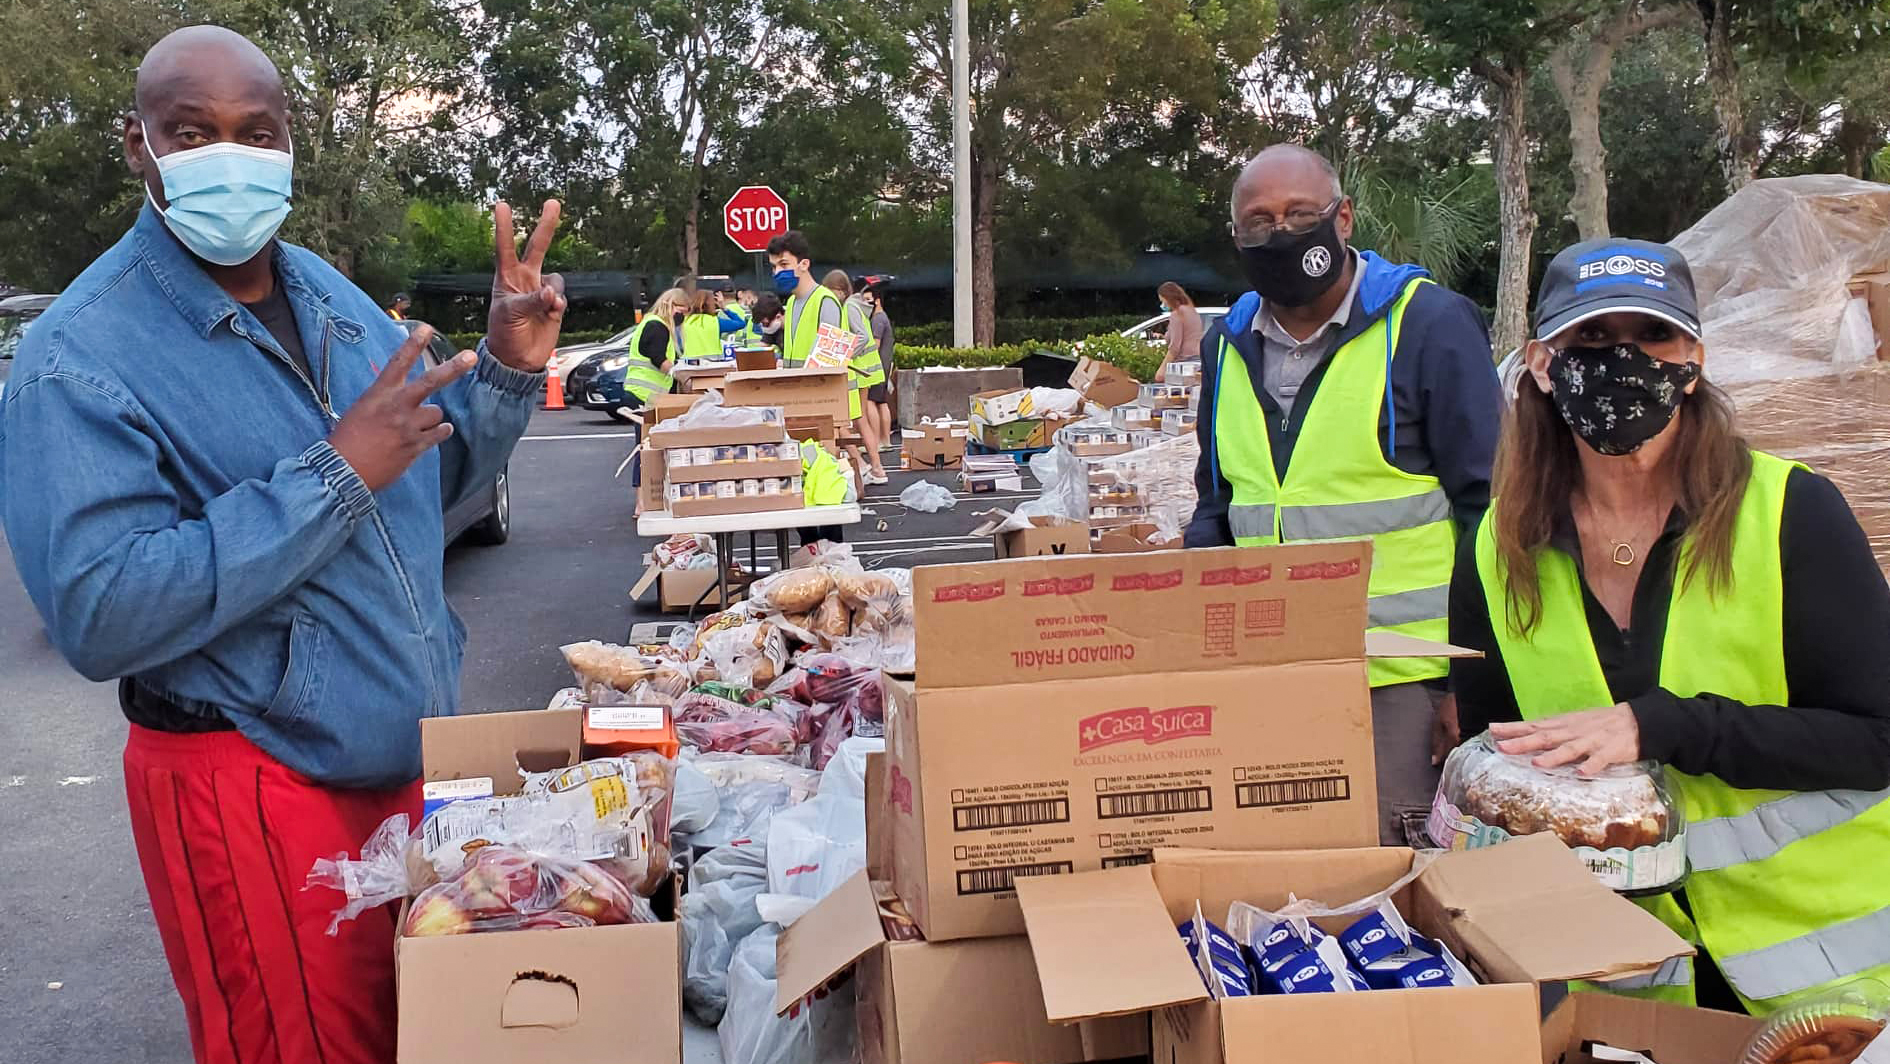 Register in Advance for the Next Free Food Distribution at Chabad of Coral Springs